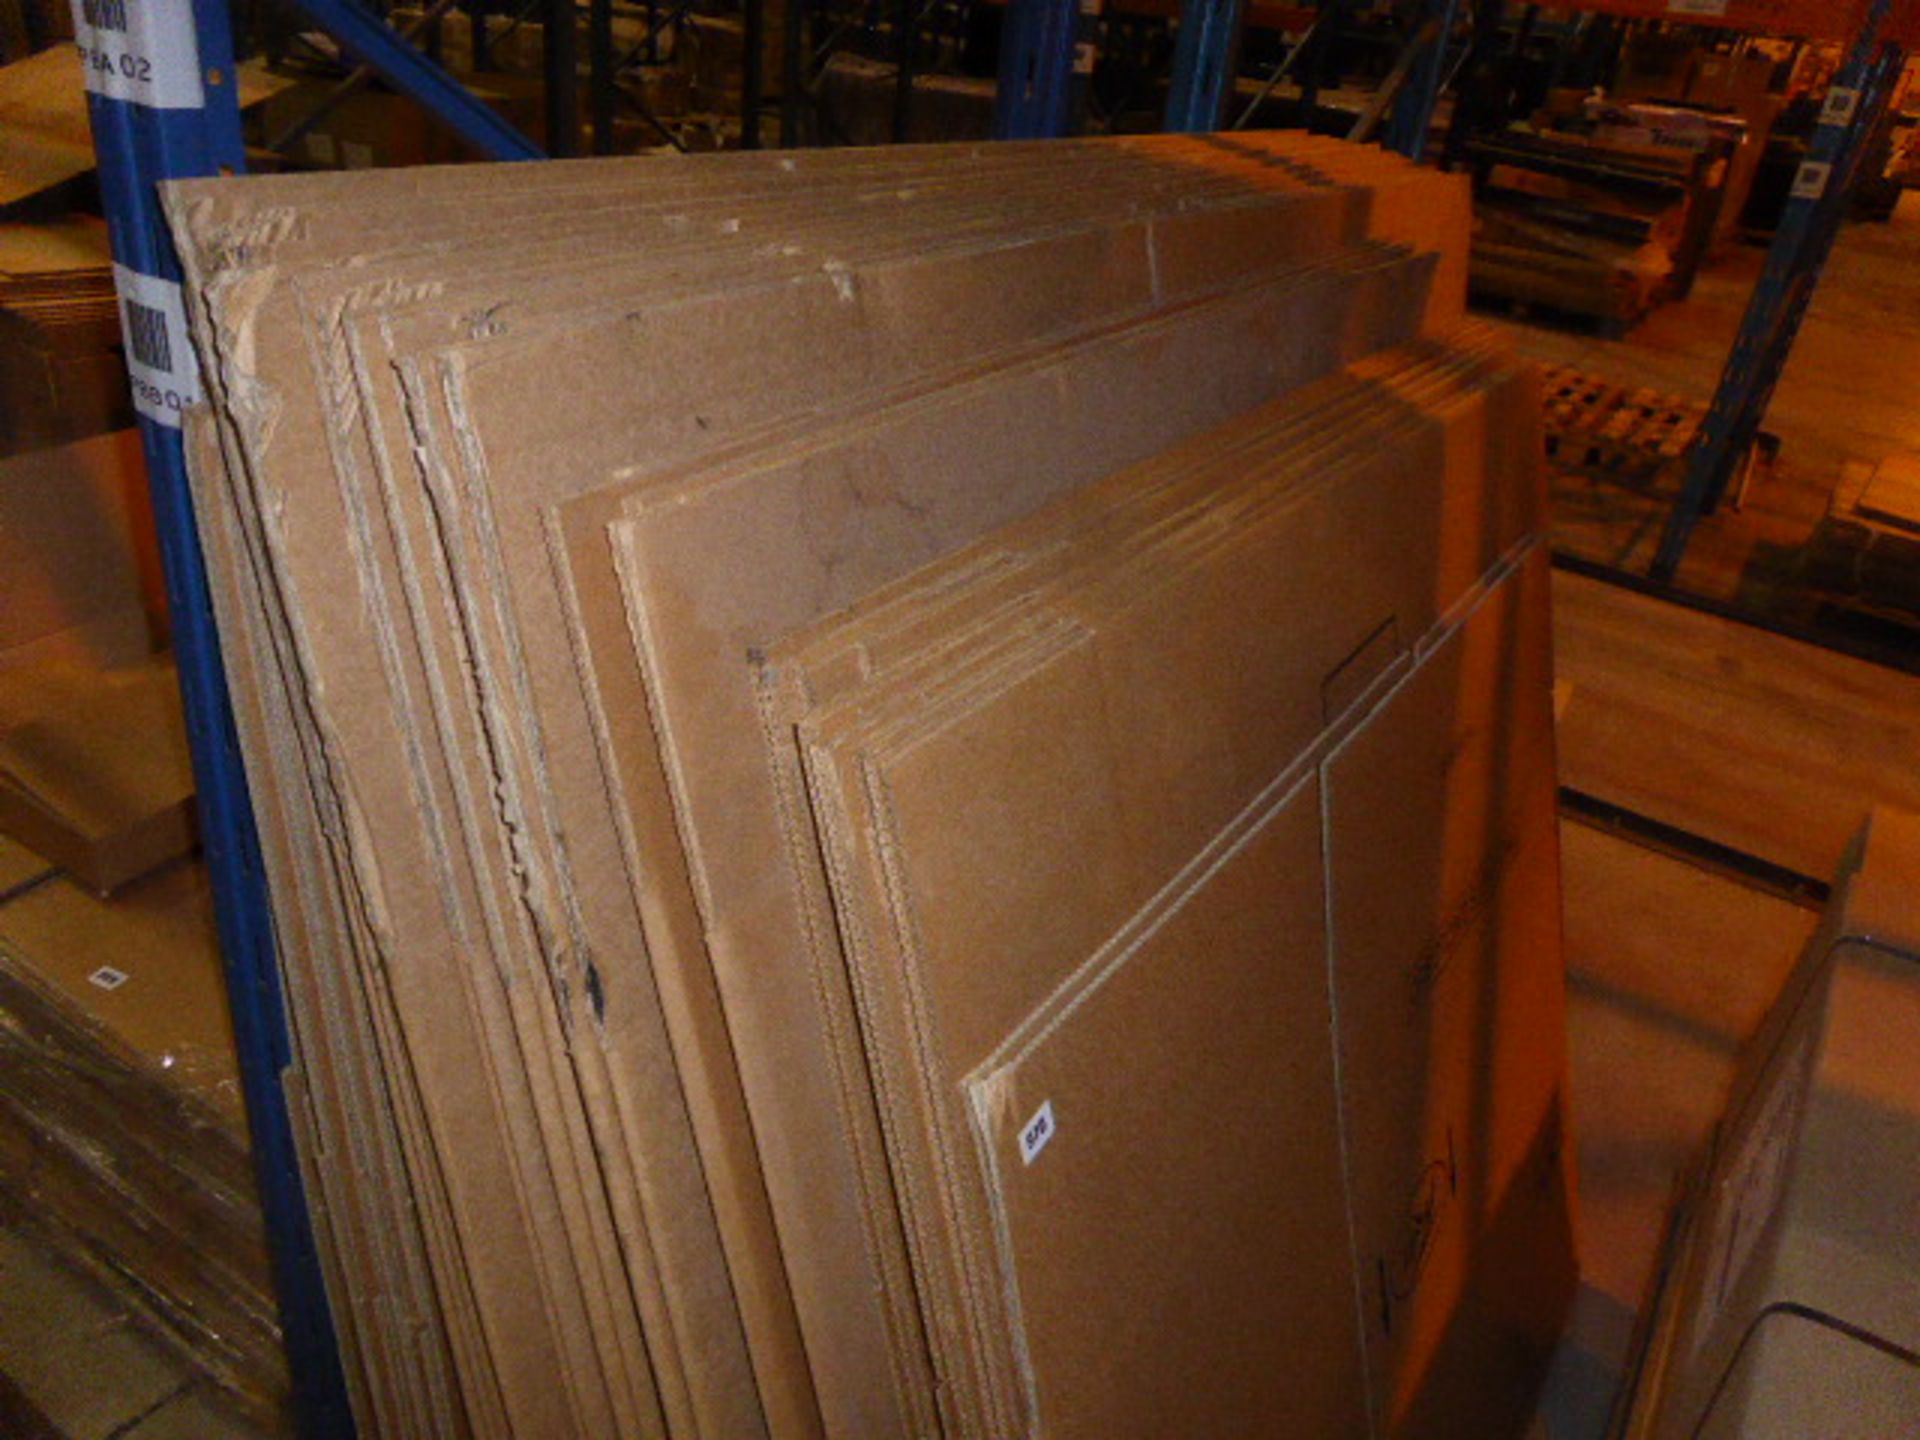 Stack of assorted sized large cardboard boxes